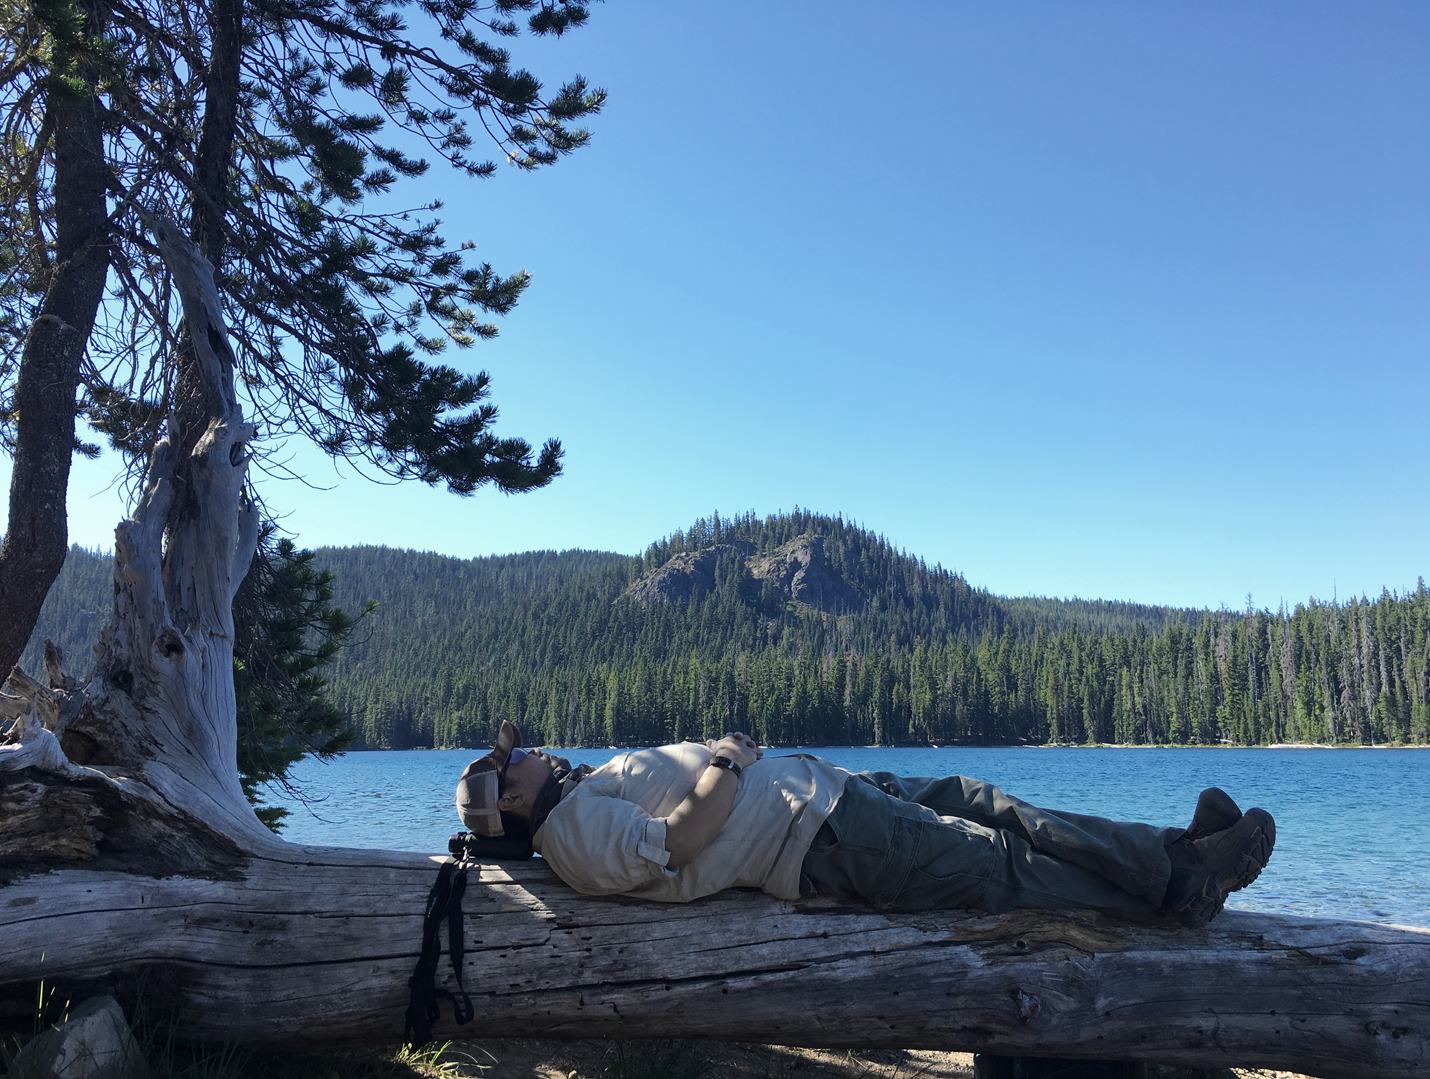 Central Oregon – Explorations from Big Pines RV Park